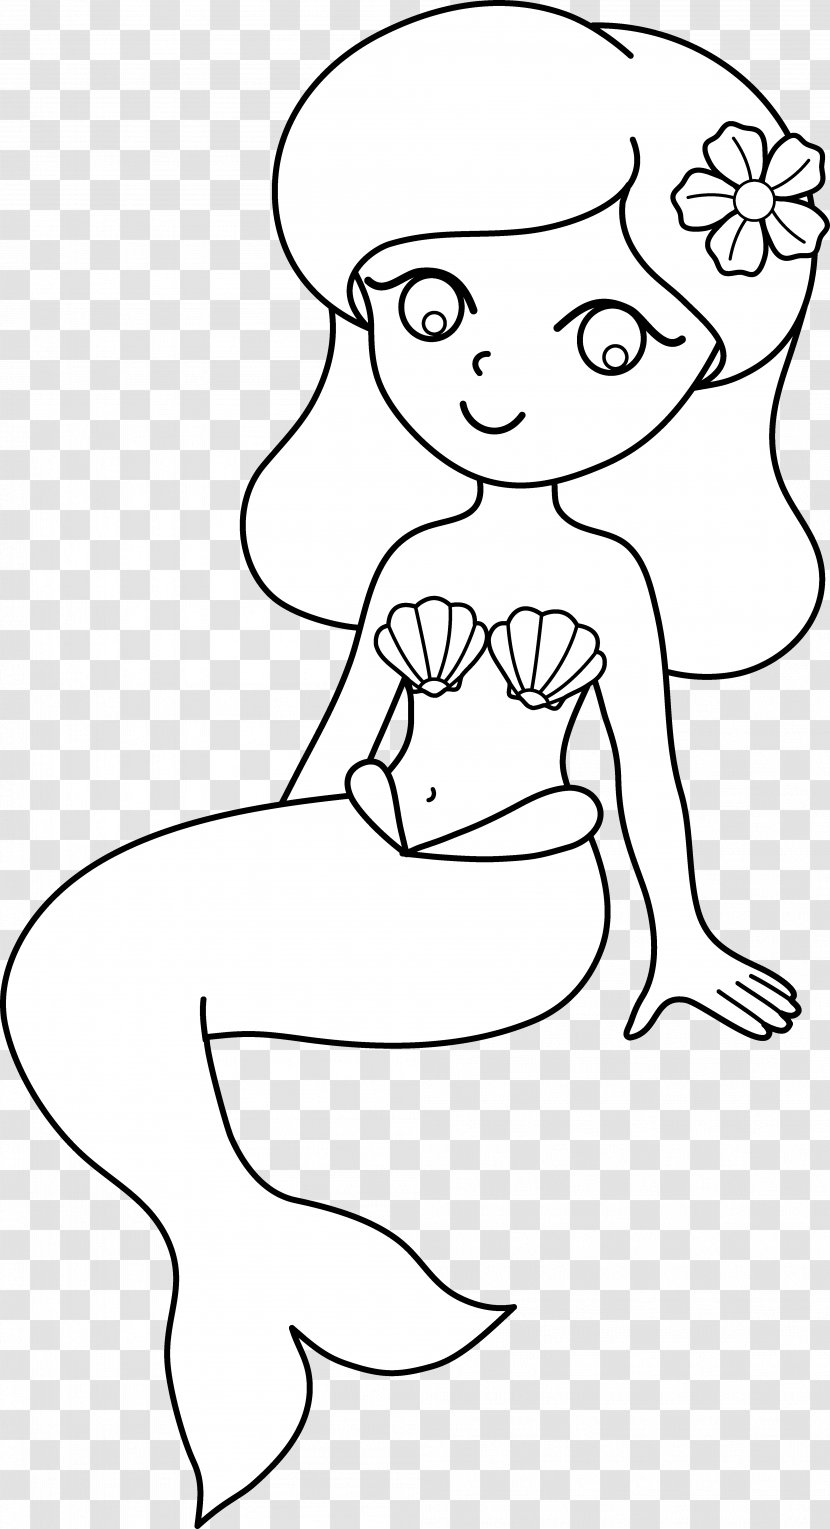 Mermaid Drawing Black And White Clip Art - Watercolor - Cliparts Transparent PNG